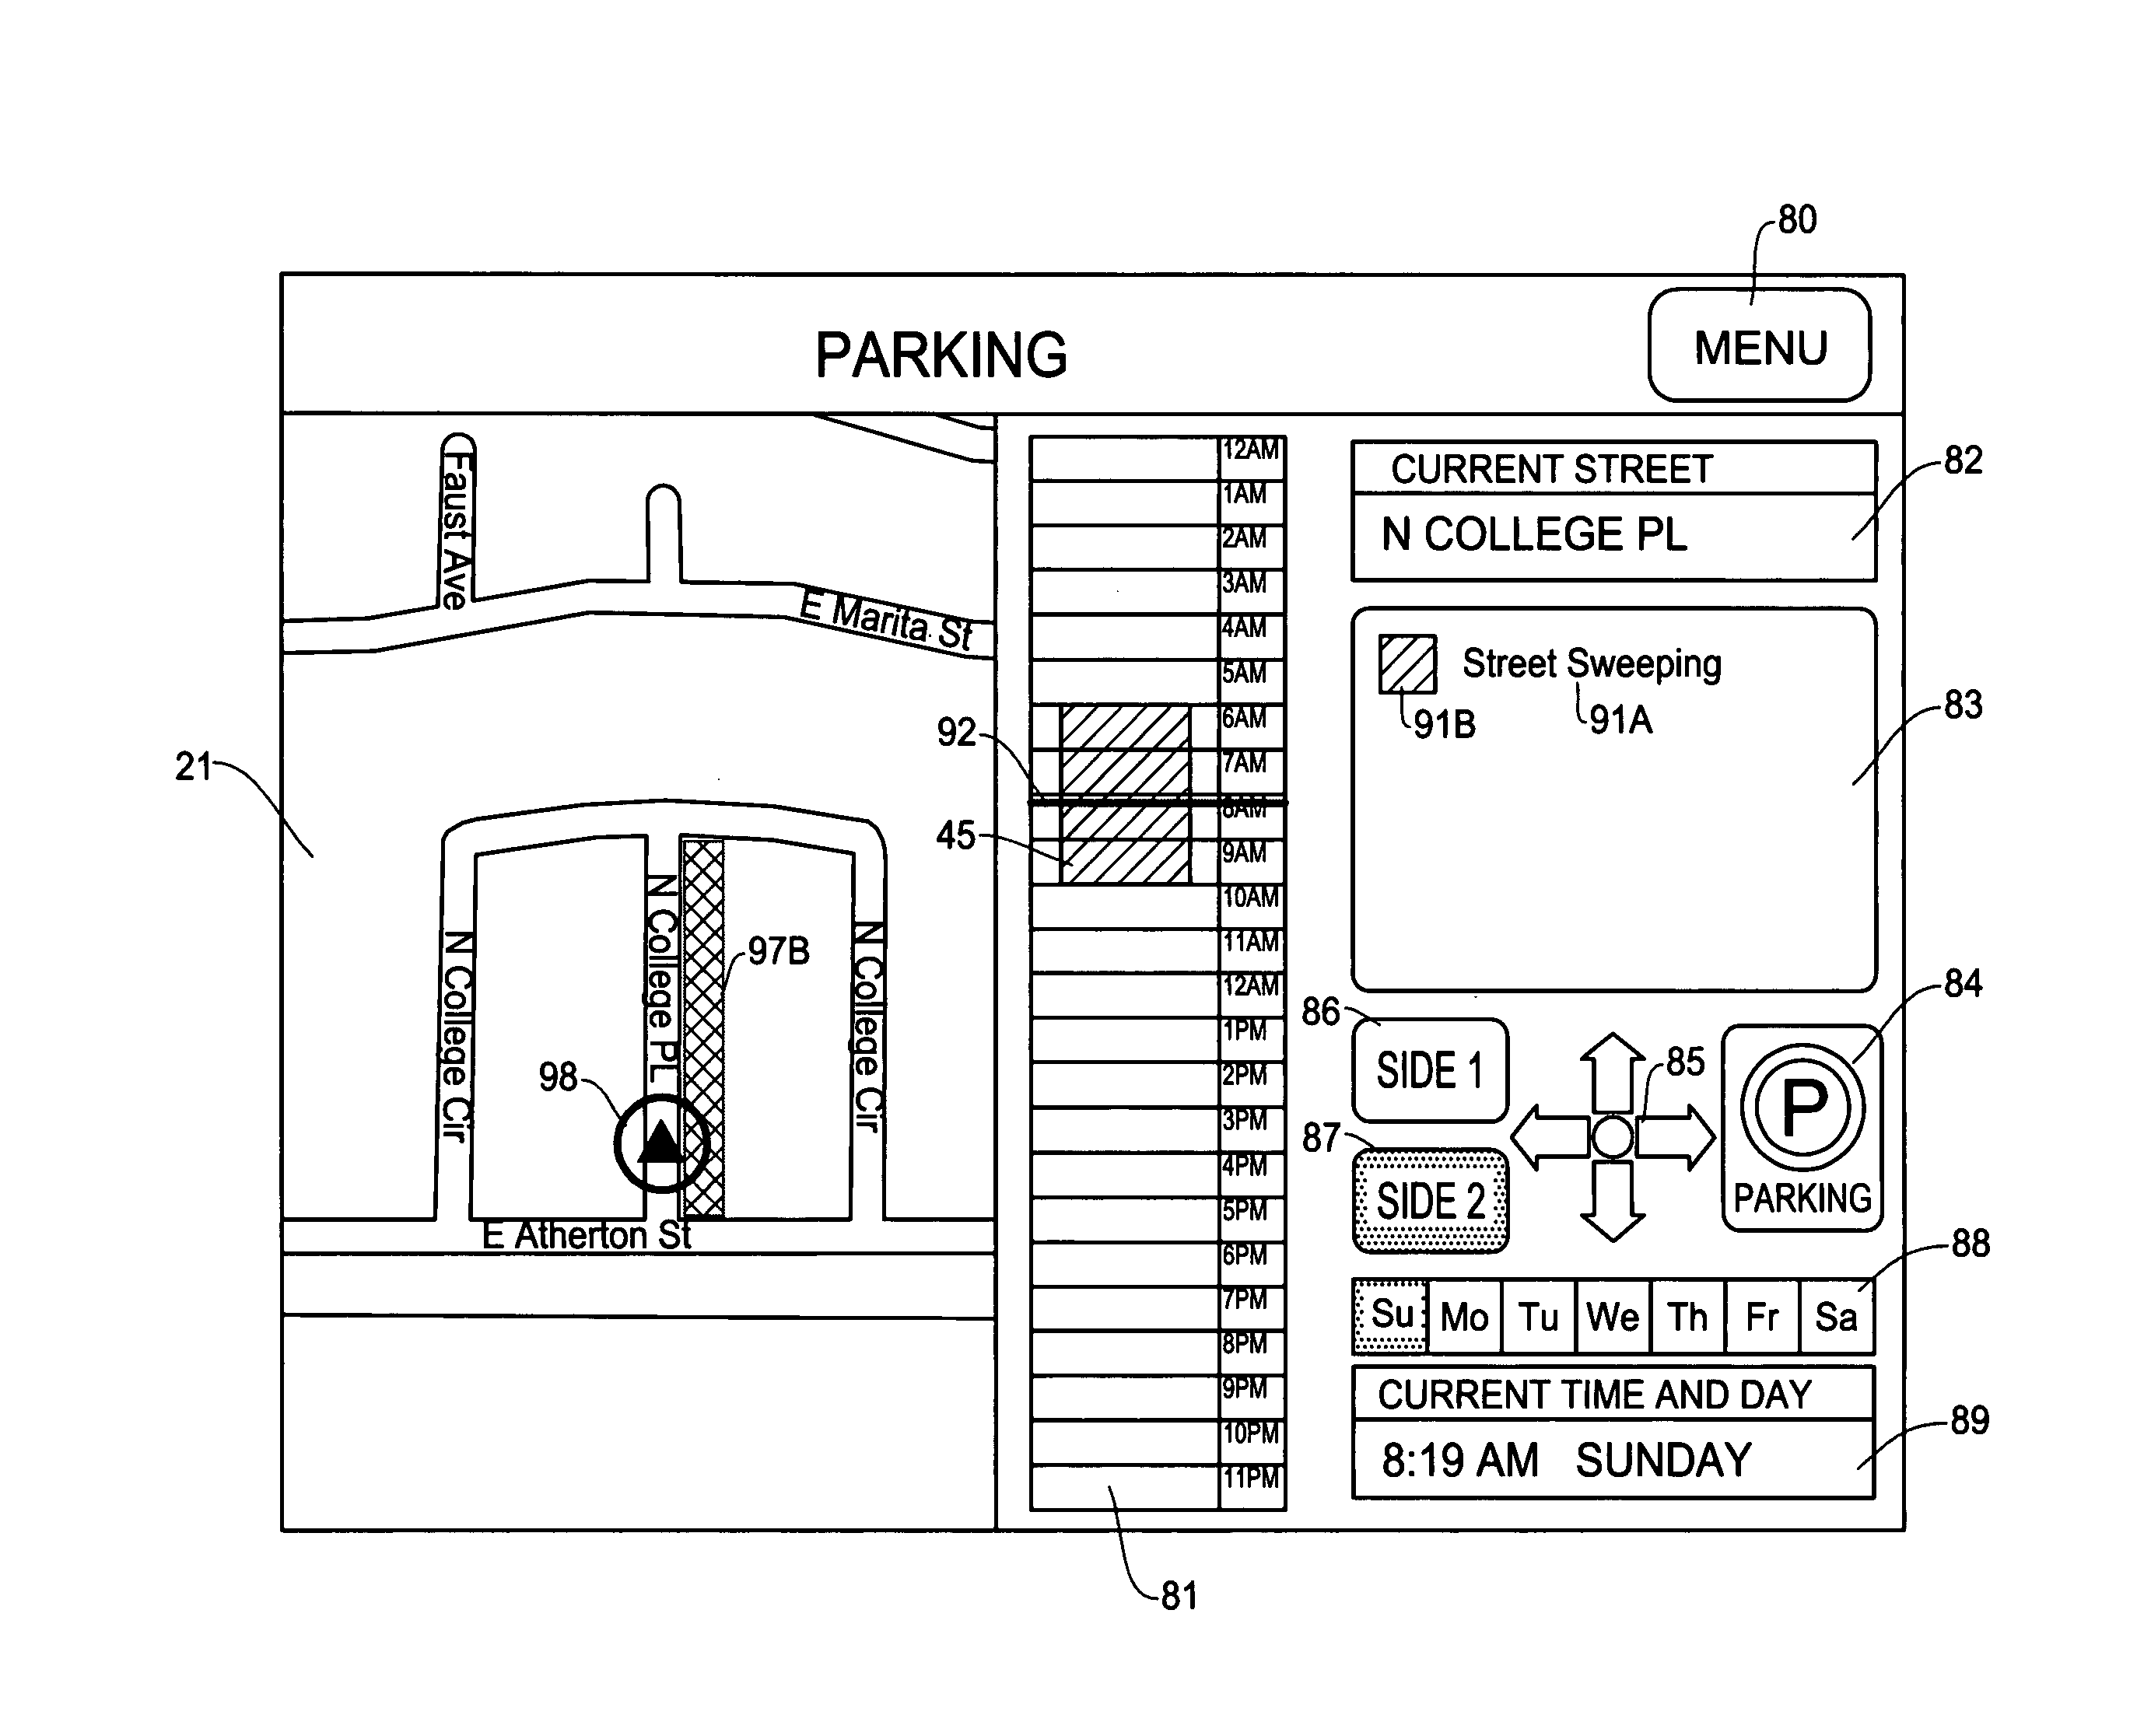 Graphic interface method and apparatus for navigation system for providing parking information